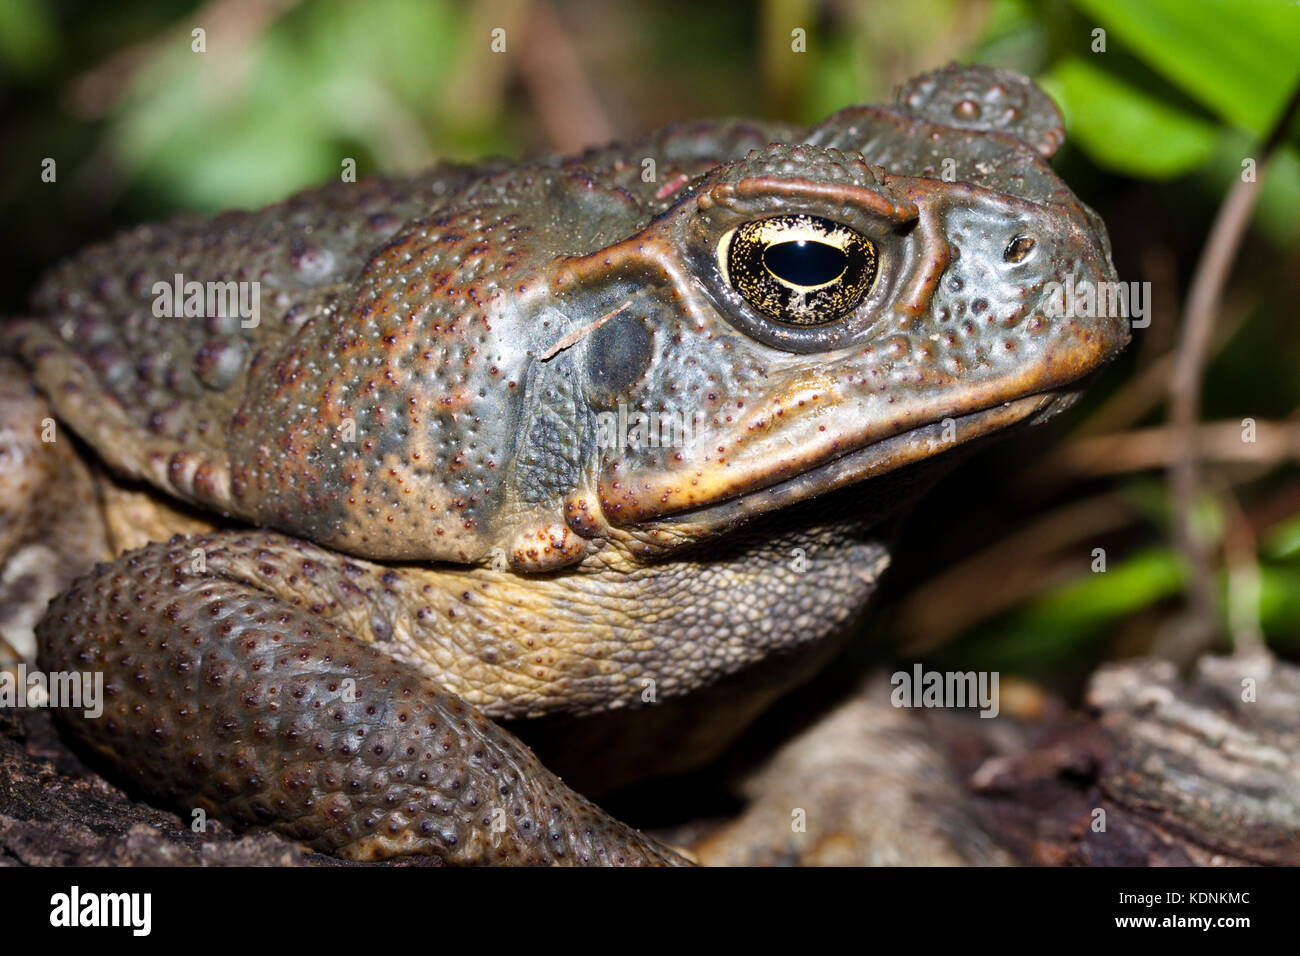 Adult Cane Toad (Bufo marinus) with prominent parotoid gland visible. Hopkins Creek. New South Wales. Australia. Stock Photo